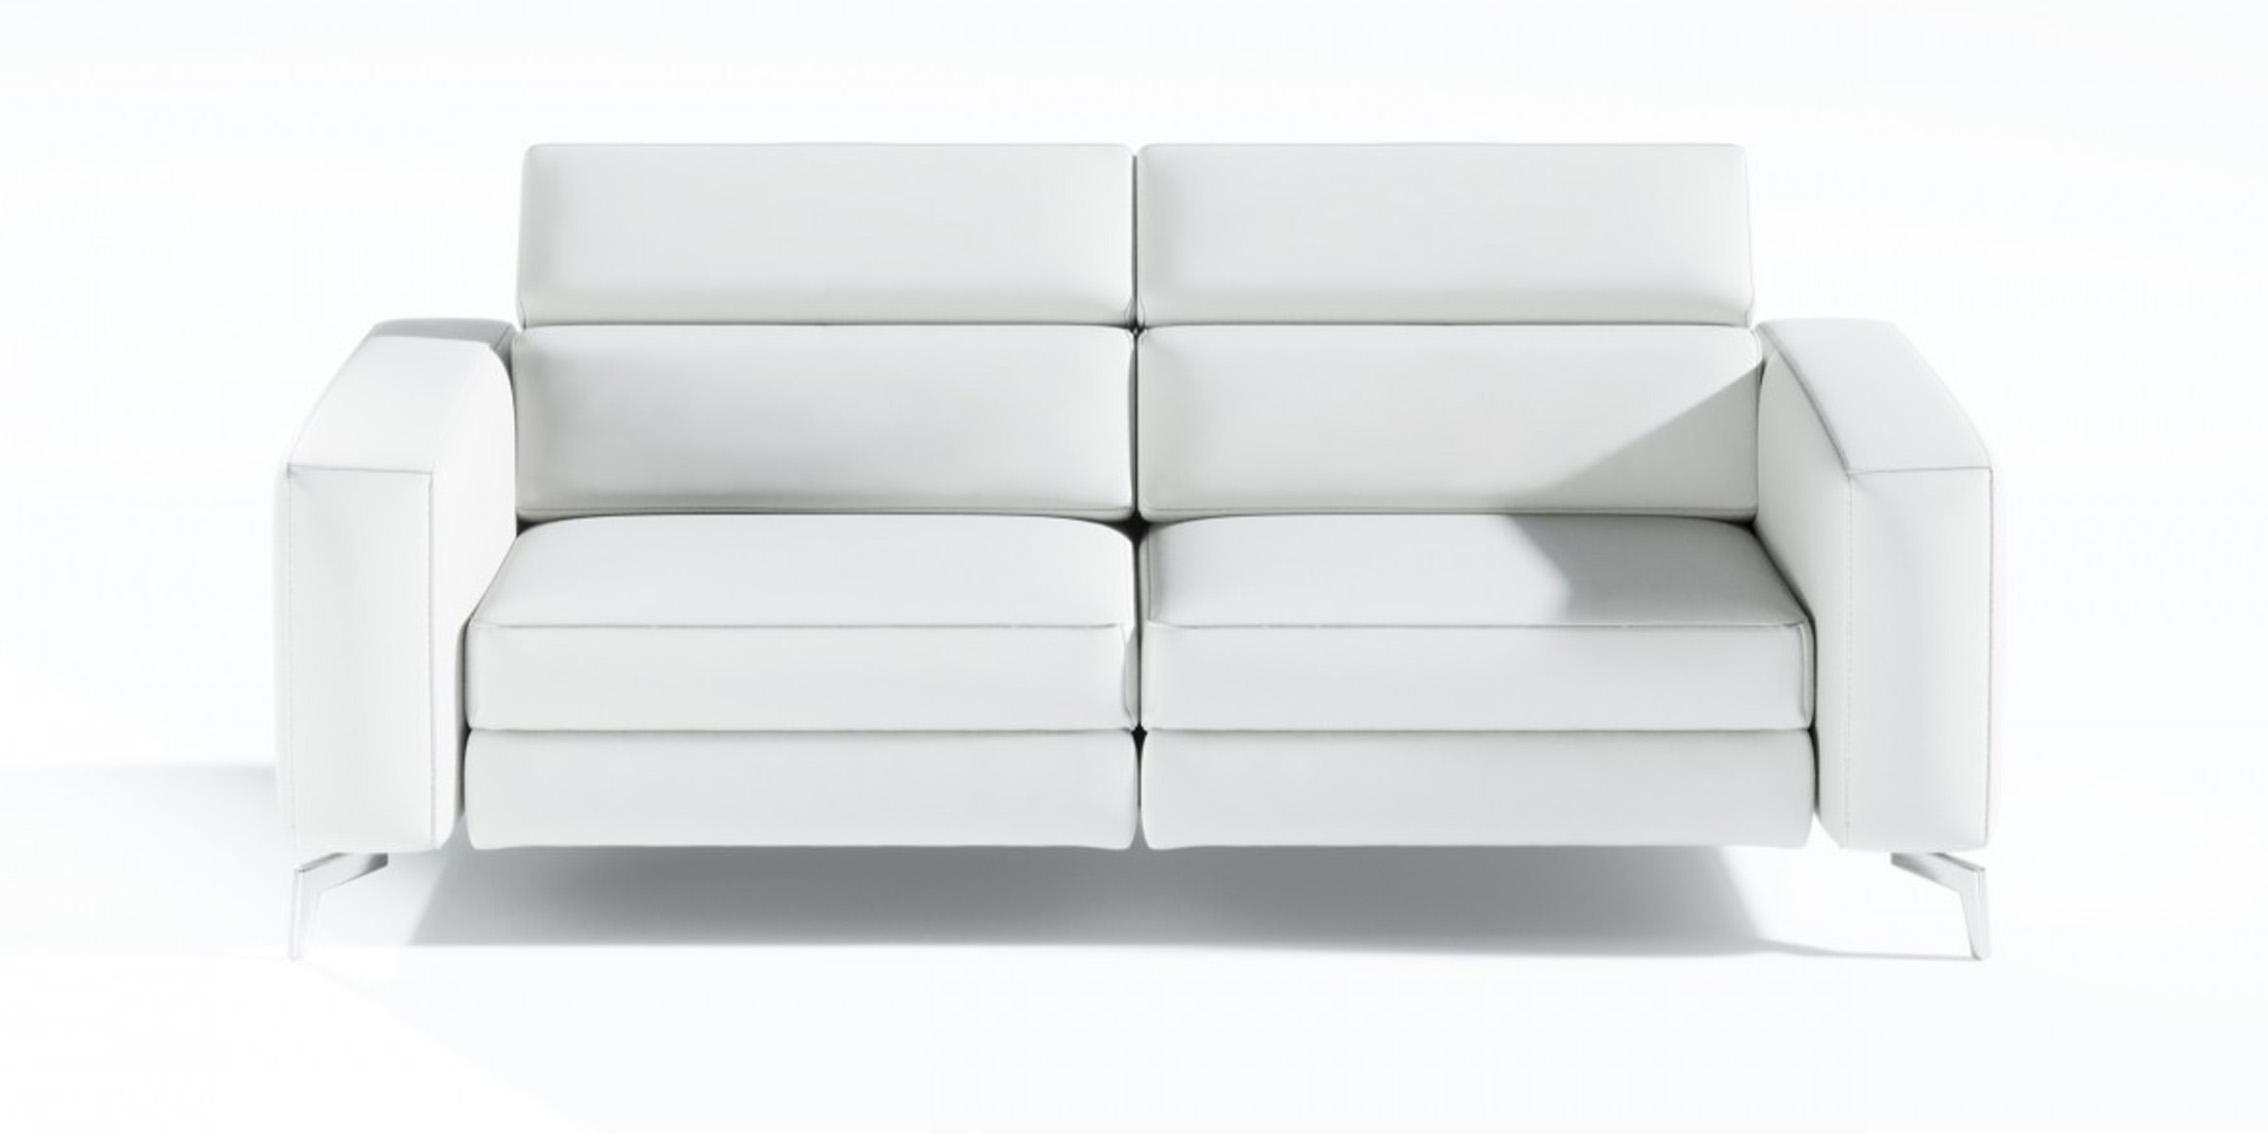 Contemporary, Modern Recliner Sofa VGCCROMA-SF-WHT-S VGCCROMA-SF-WHT-S in White Italian Leather